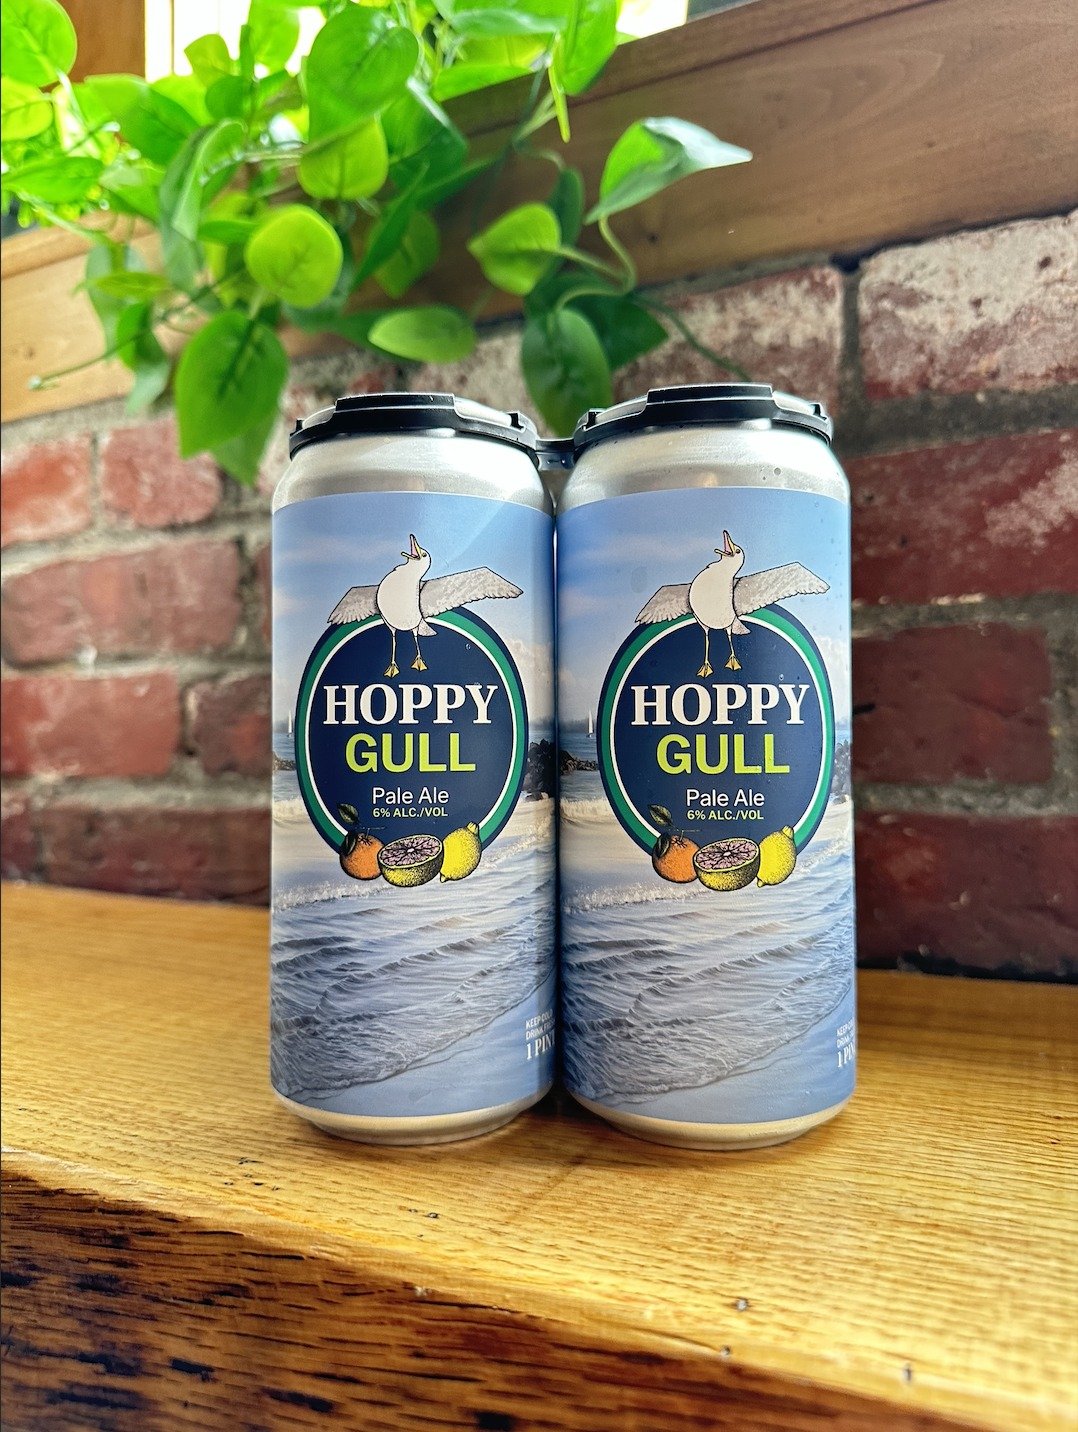 CALLING ALL GULL 2024 GRADUATES! We partnered with our neighbors at Endicott College to bring you Hoppy Gull! This pale ale is hazy and juicy, with mild hop bitterness and notes of bright citrus-- grapefruit and orange zest, with a hint of lemon. Com